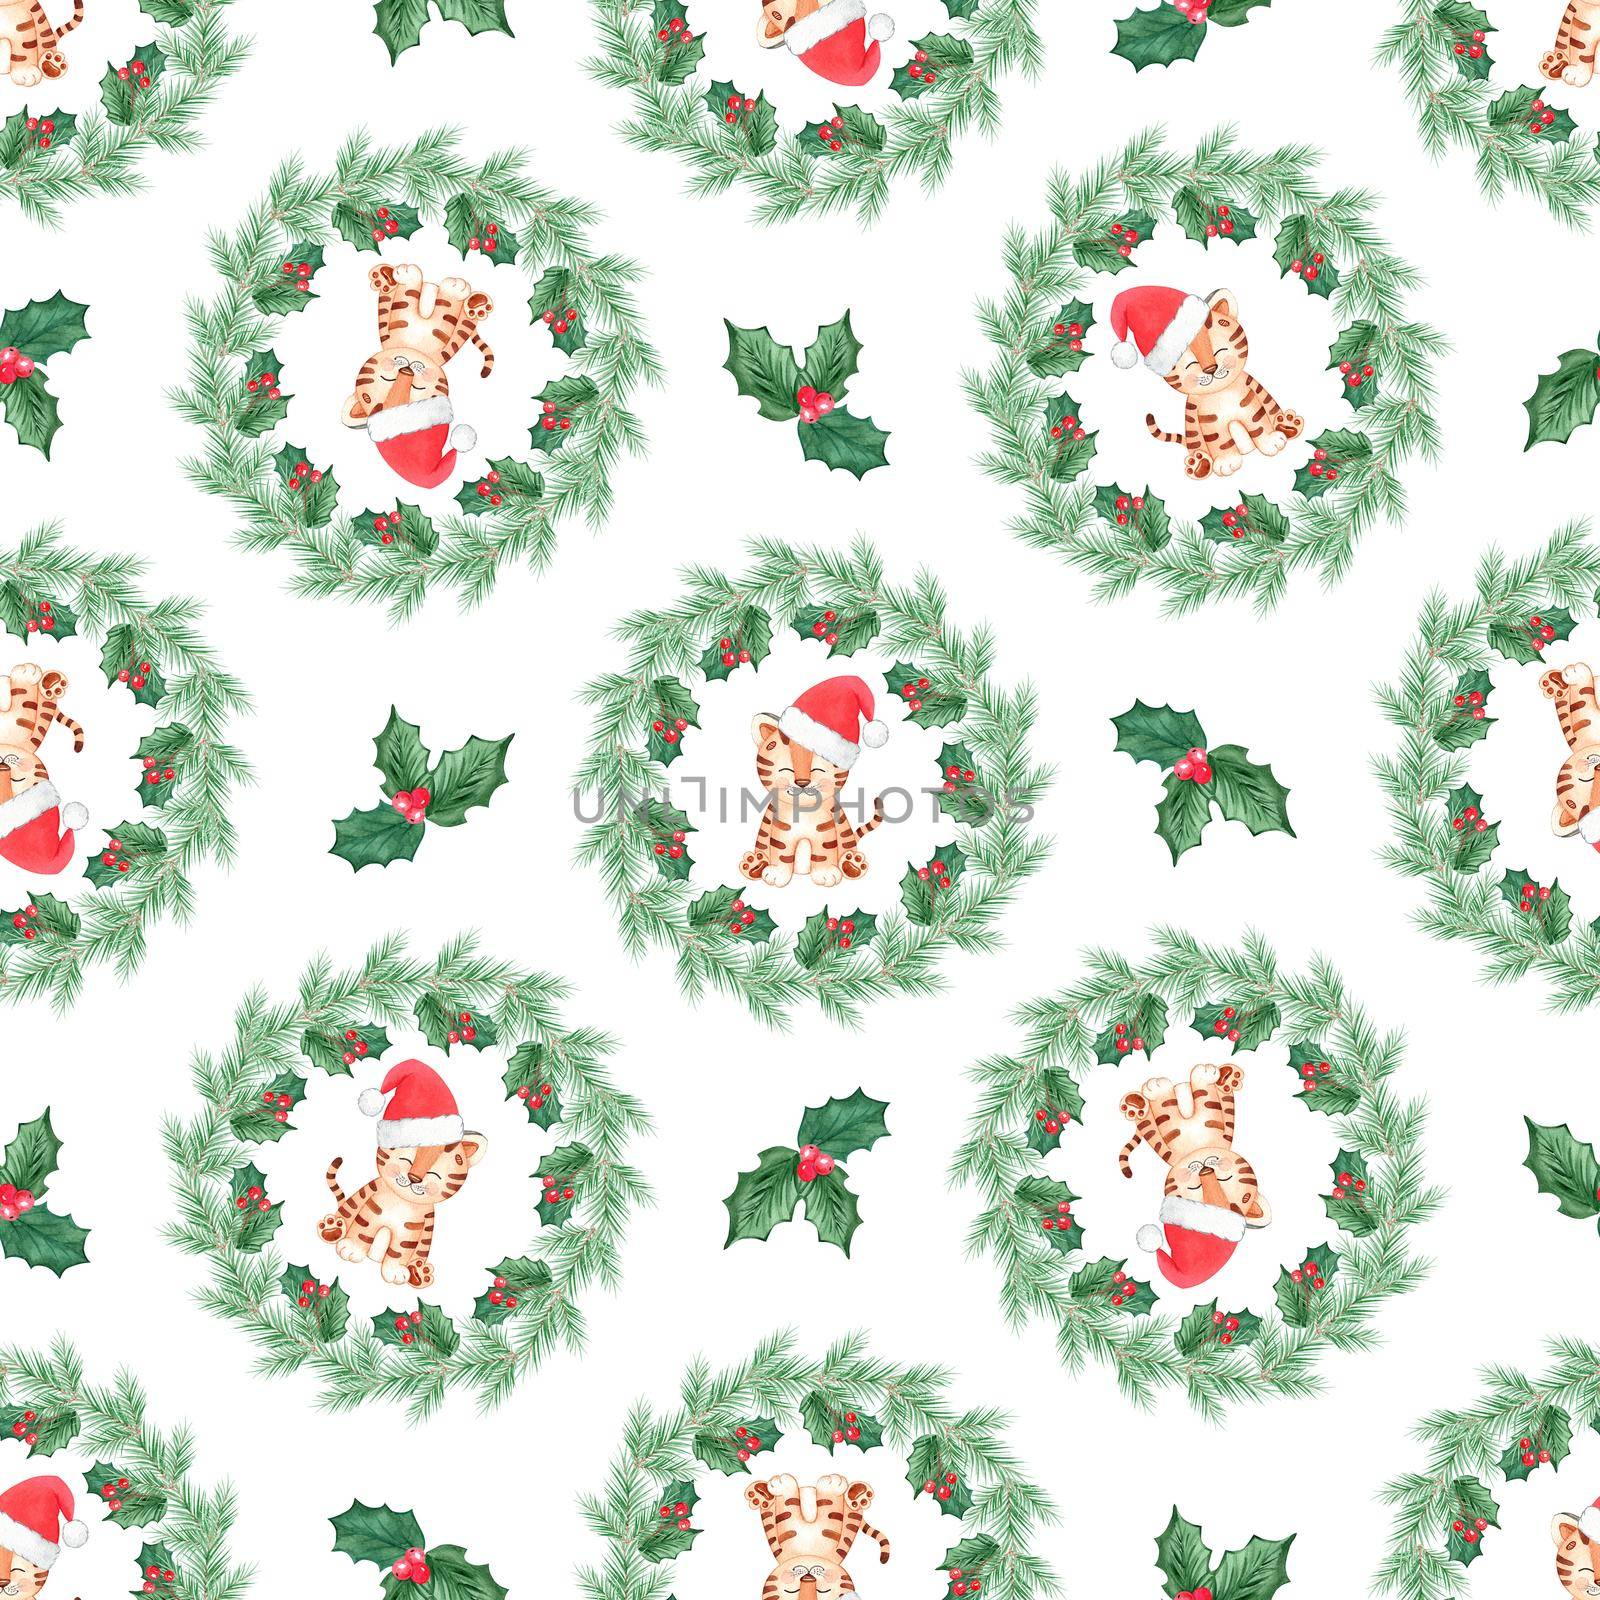 Watercolor christmas tiger in fir wreath seamless pattern on white background by dreamloud